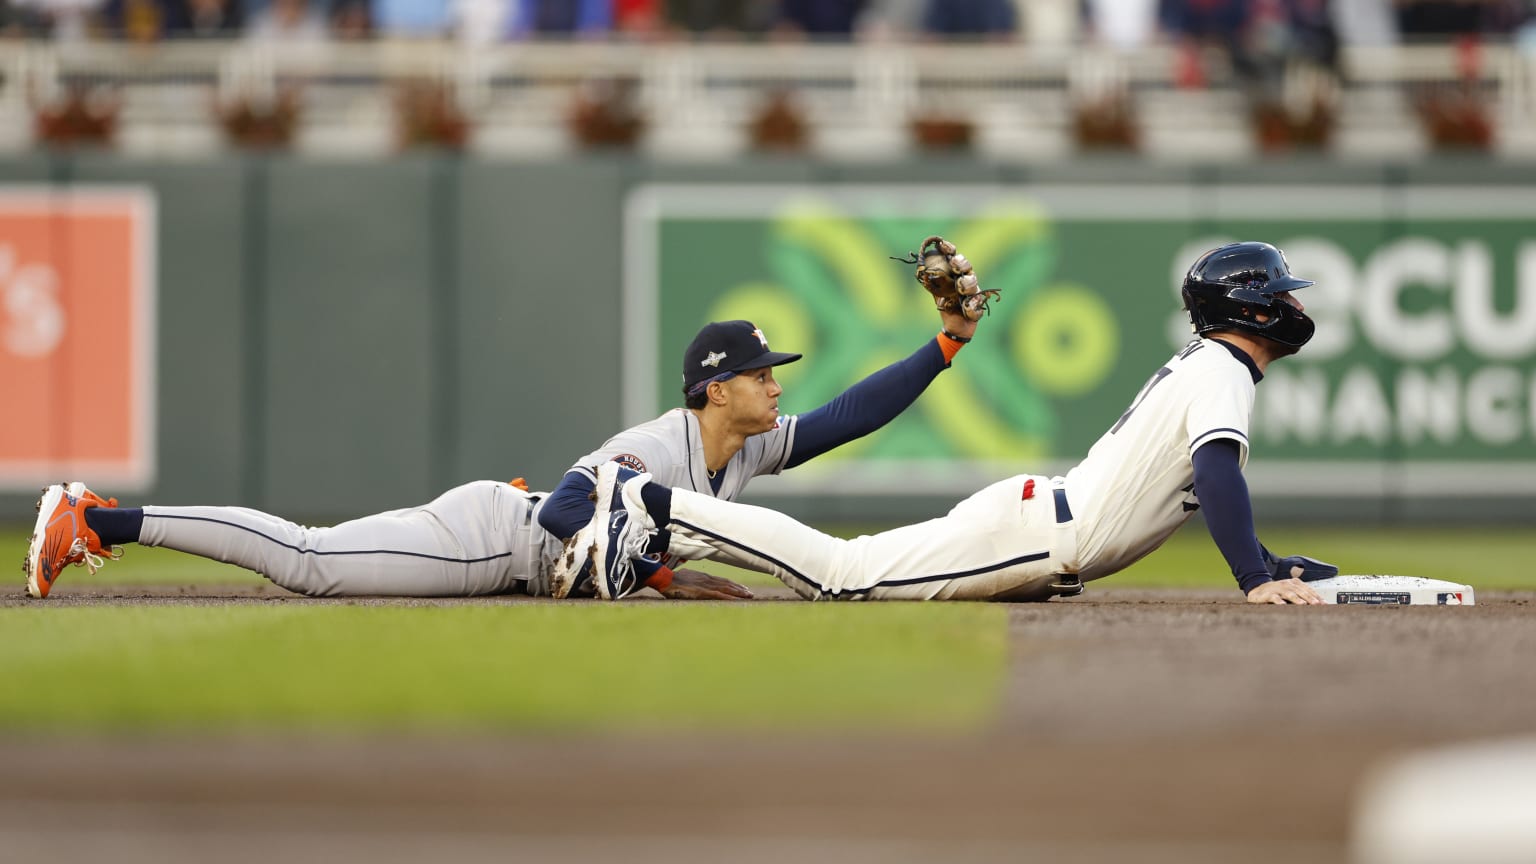 Jeremy Peña makes a diving grab to kickstart the Astros' double play  against the Twins